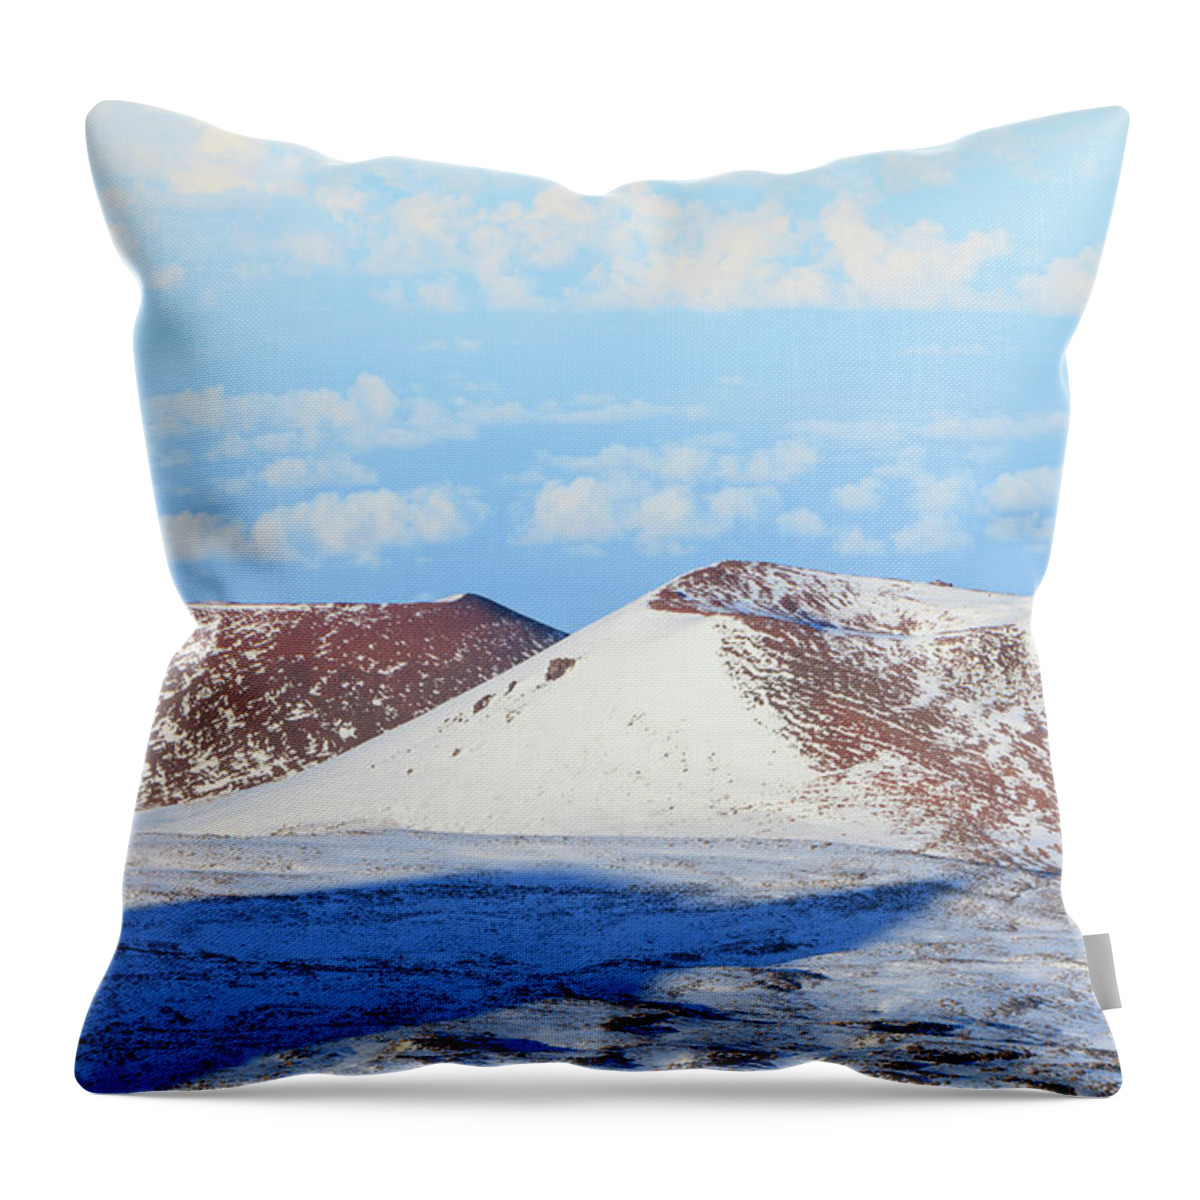 Scenics Throw Pillow featuring the photograph Snowy Hilltops And Blue Sky by Cultura Exclusive/stuart Westmorland